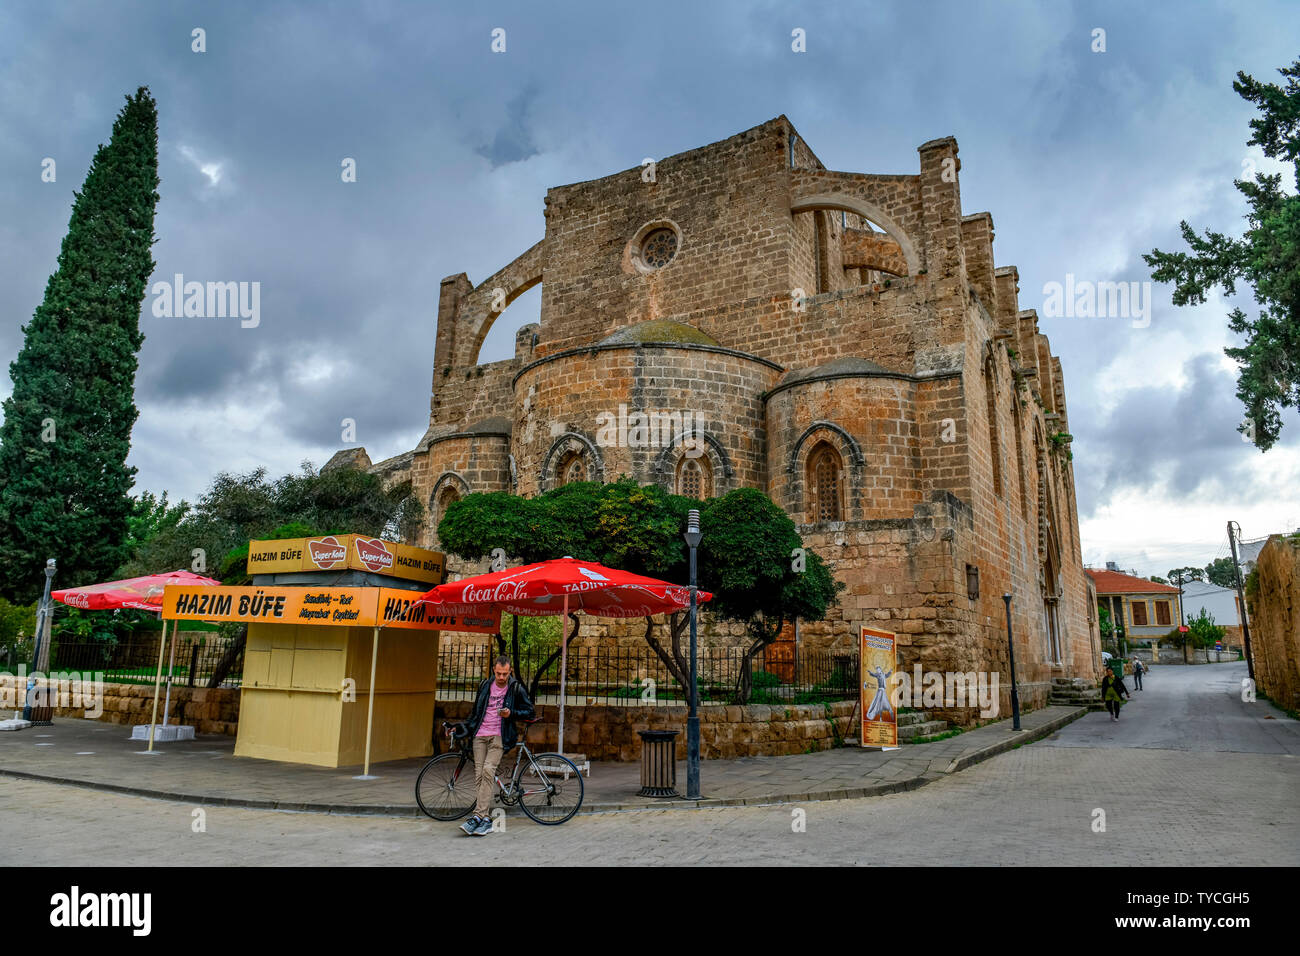 Sinan Pasha mosque, church St Peter and St Paul, Famagusta, Northern Cyprus Stock Photo